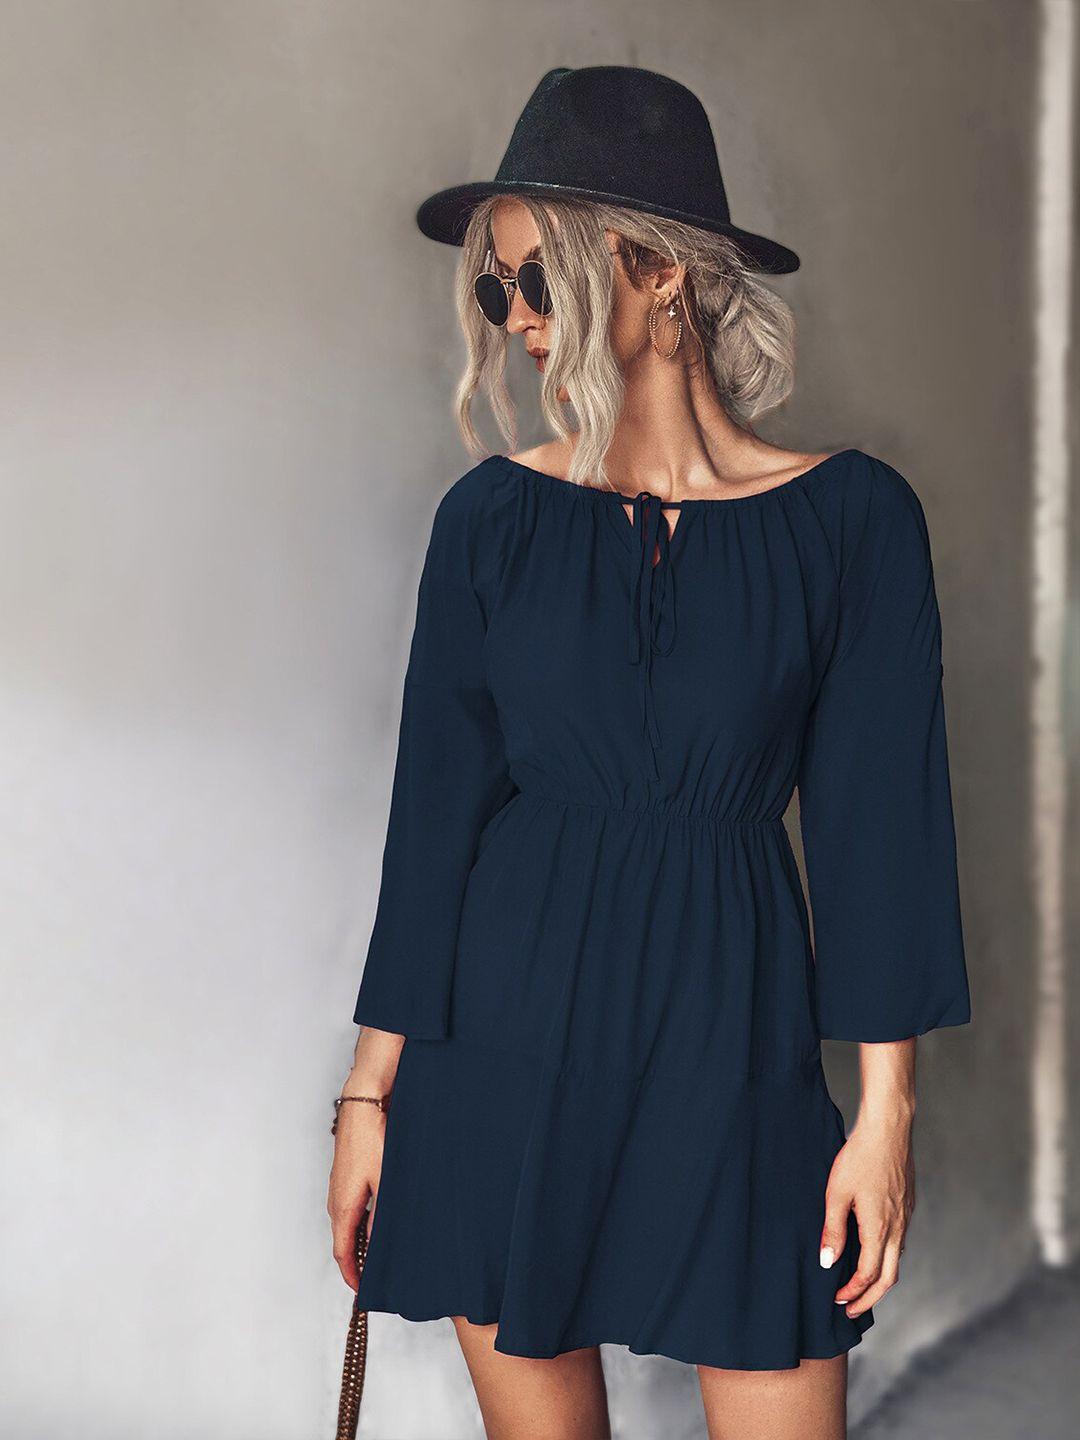 stylecast navy blue tie-up neck flared sleeves a-line dress